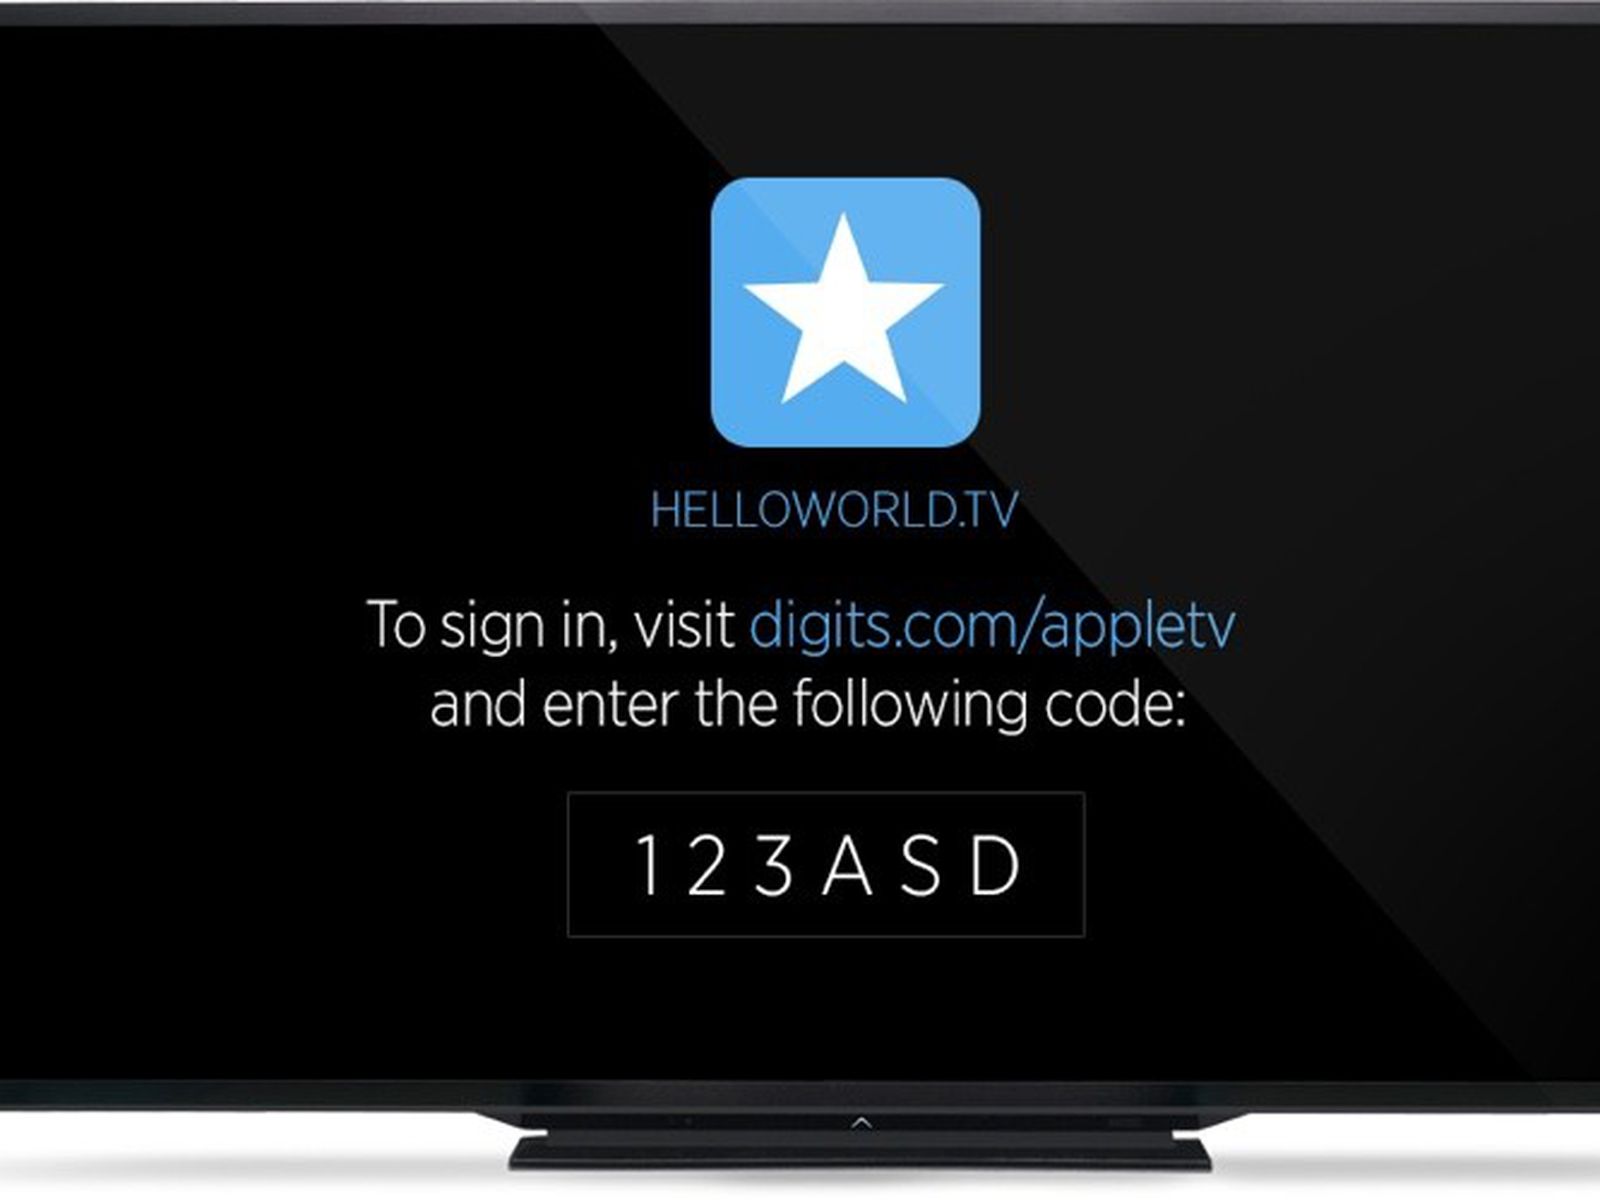 Twitter Announces for tvOS to Simplify the App Login Process - MacRumors